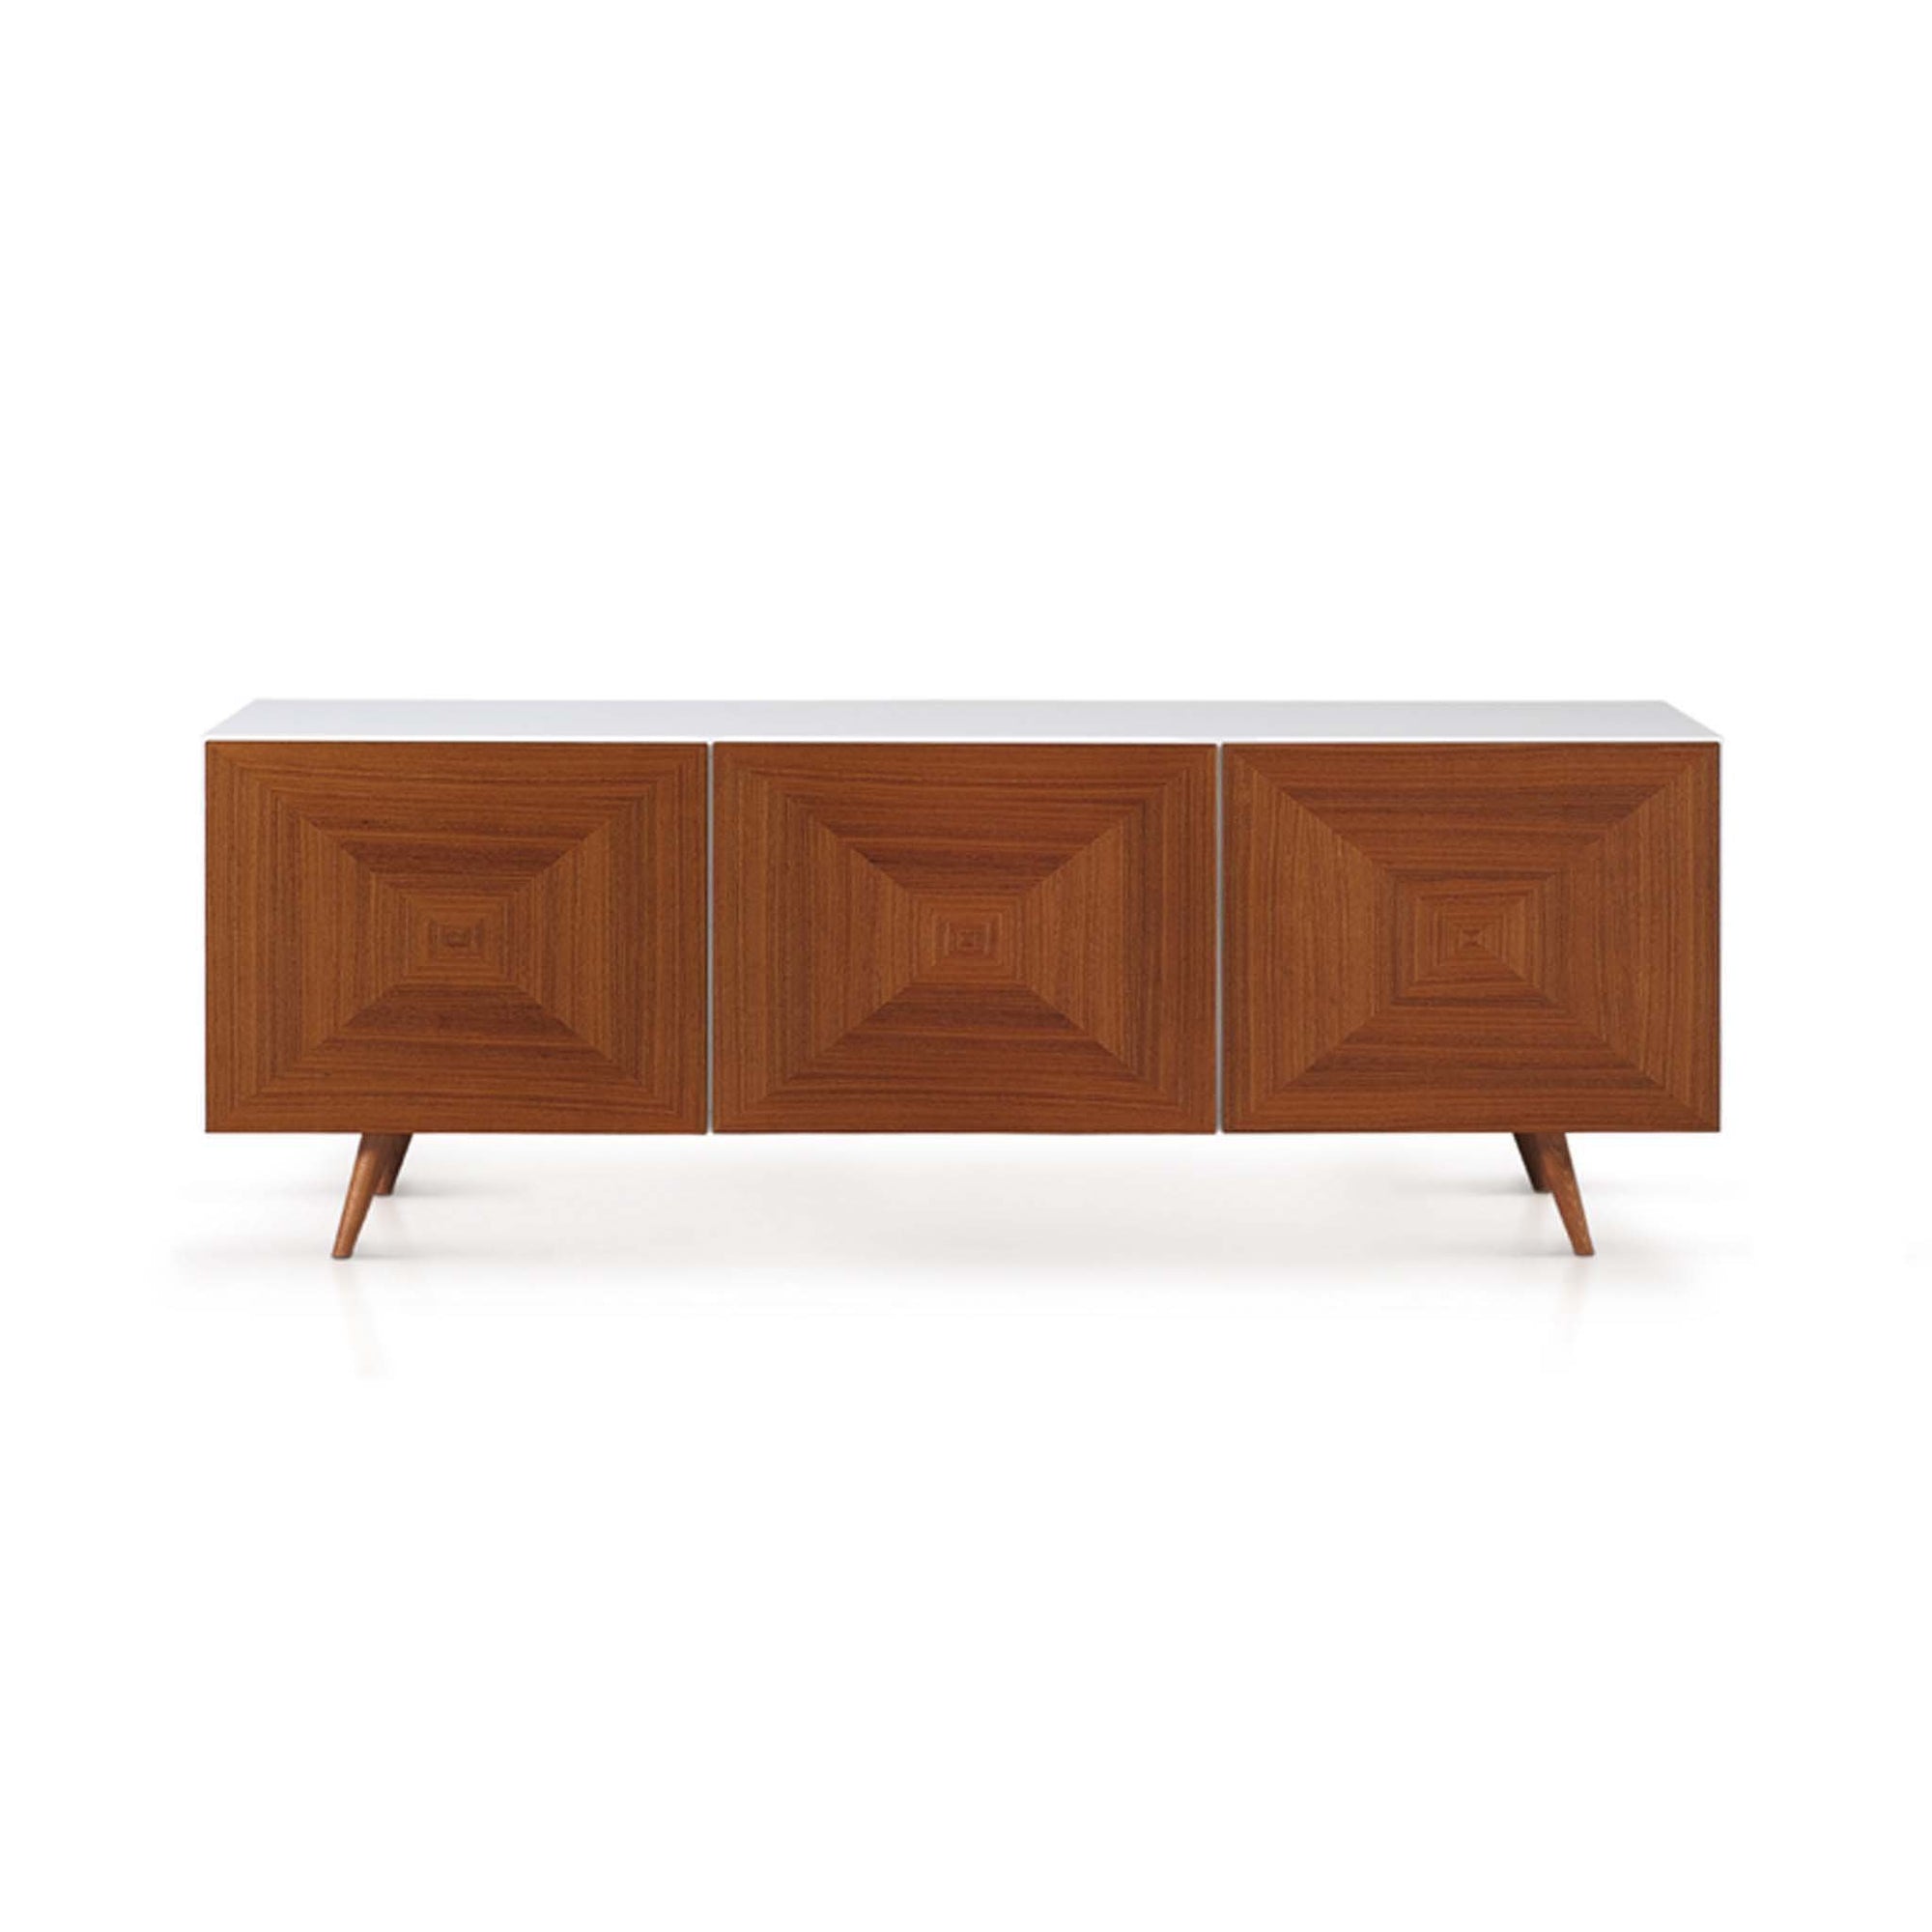 Bellini-City Sideboard in HG - Doors-Sideboards & Buffets-MODTEMPO